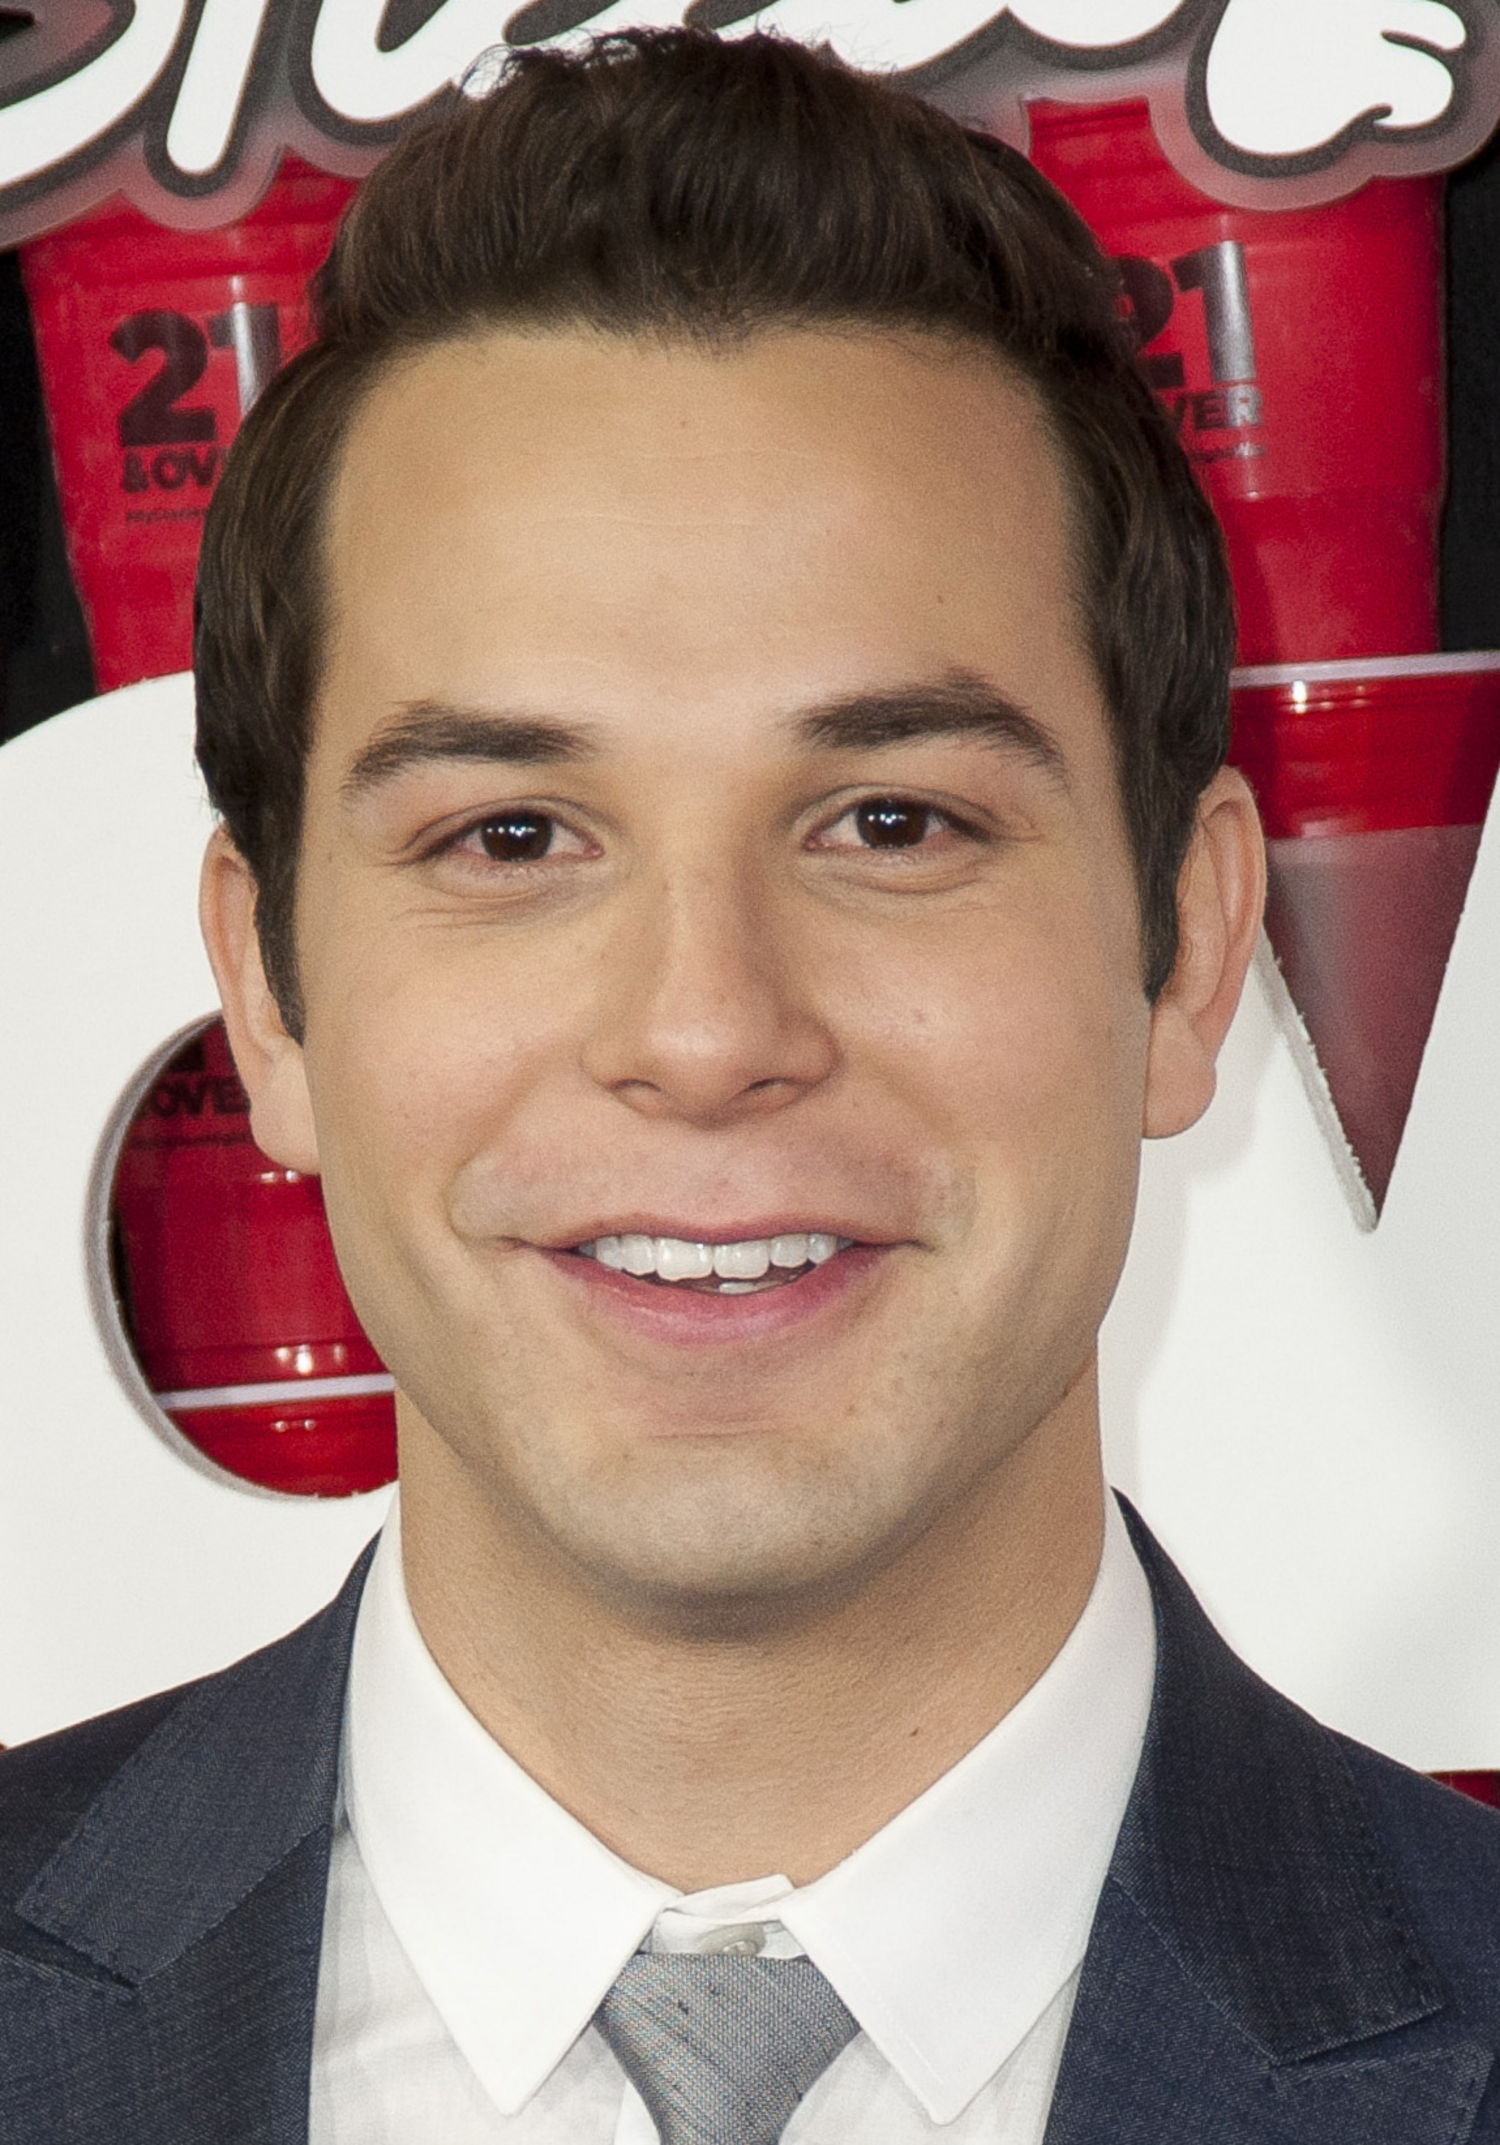 Skylar Astin: Pitch Perfect: The Quest for Collegiate a Cappella Glory, Book by Mickey Rapkin - the base for the American musical comedy film with Skylar. 1500x2150 HD Wallpaper.